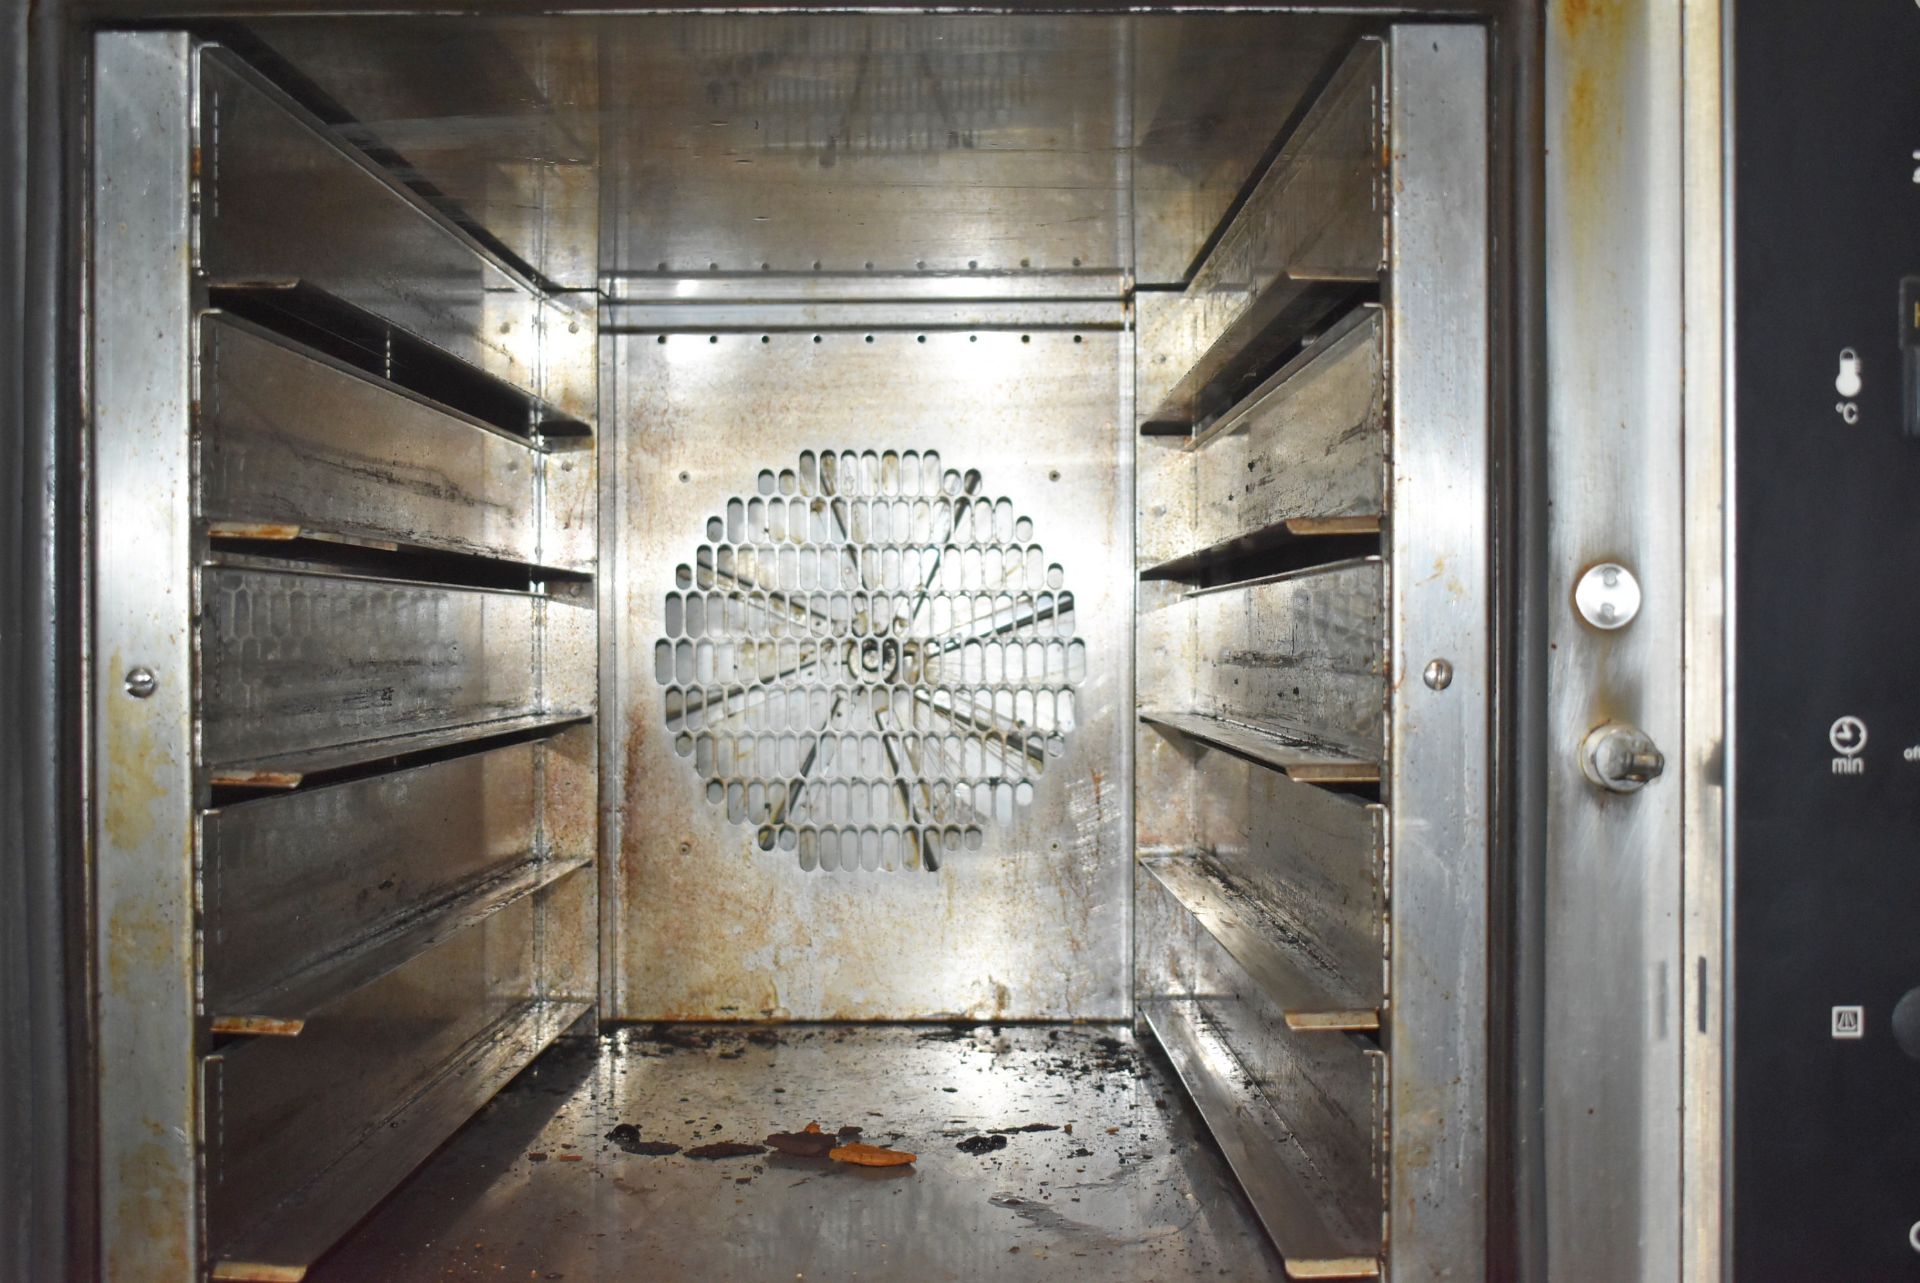 1 x Tom Chandley Double Door Bakey Oven - 3 Phase - Model TC53018 - Removed From Well Known - Image 6 of 8